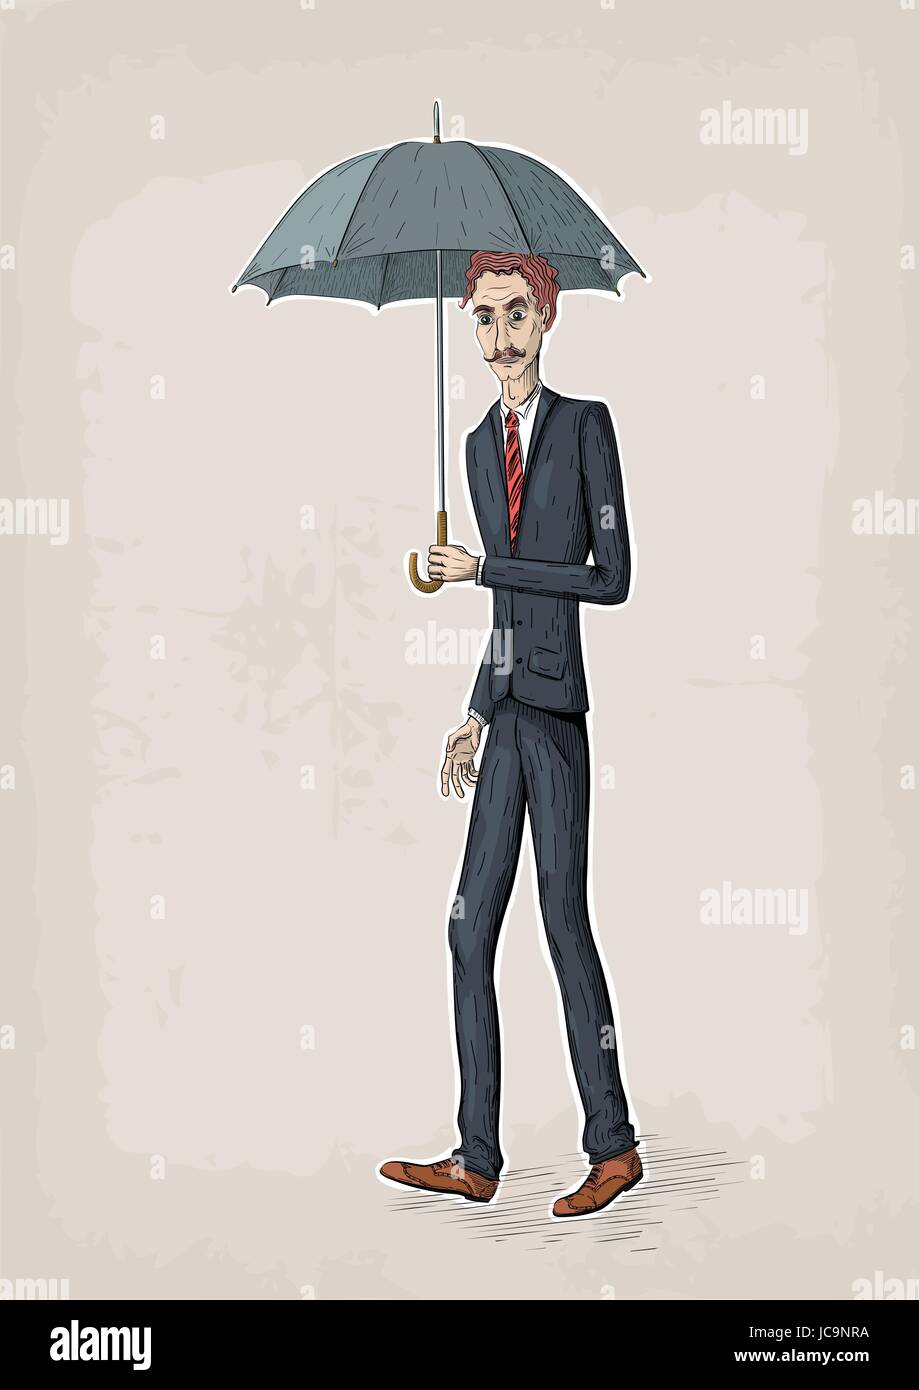 Vector line illustration of young business men walk and hold an umbrella in hand Stock Vector